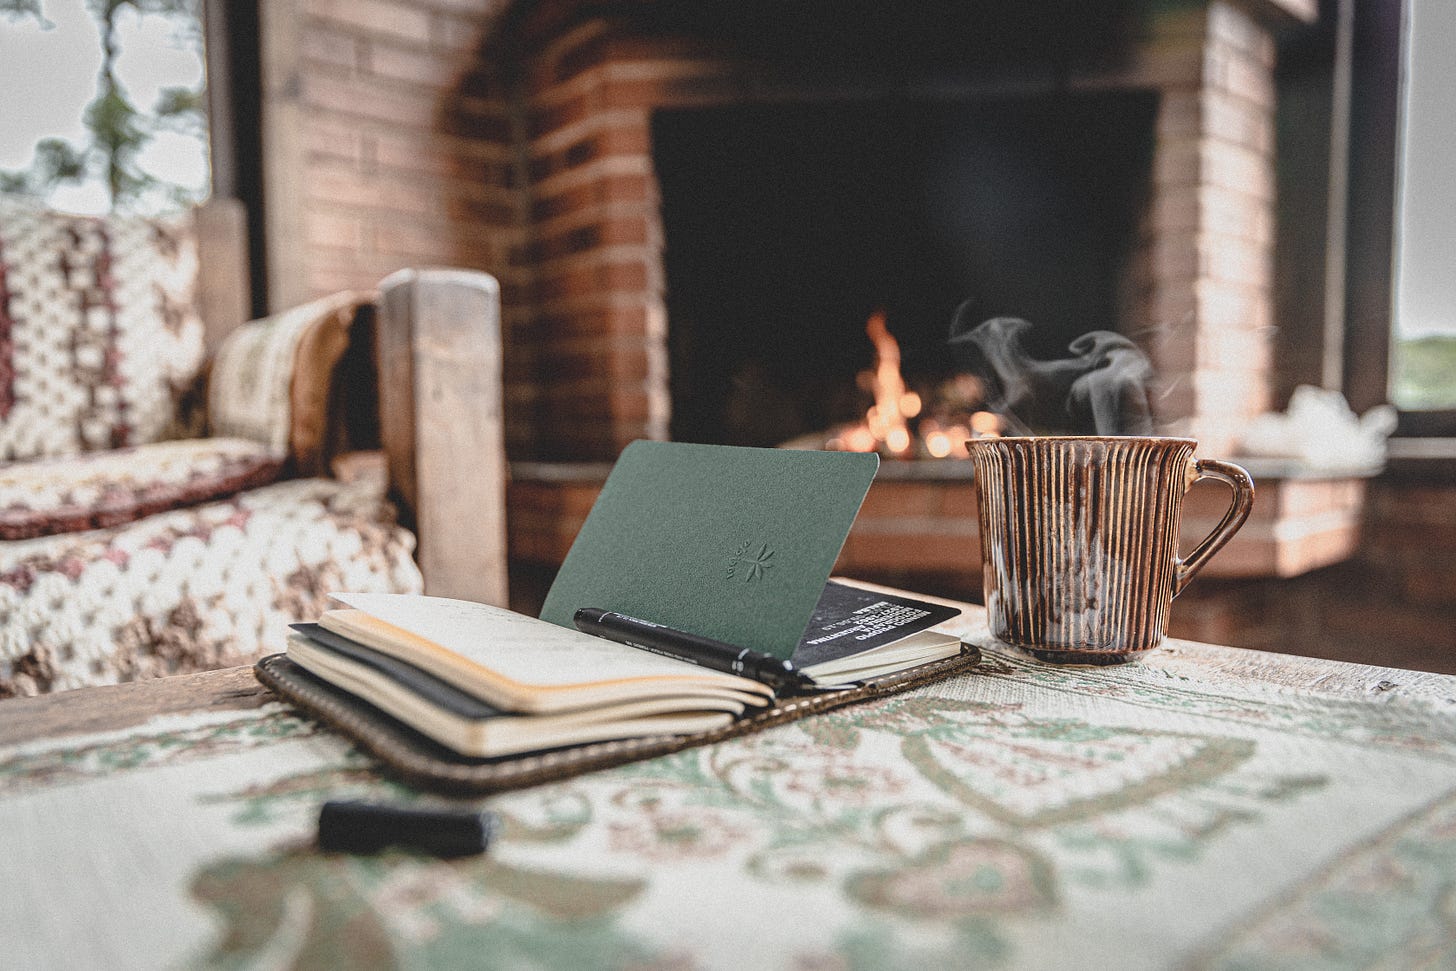 notebook on table by mug in front of chair and fireplace